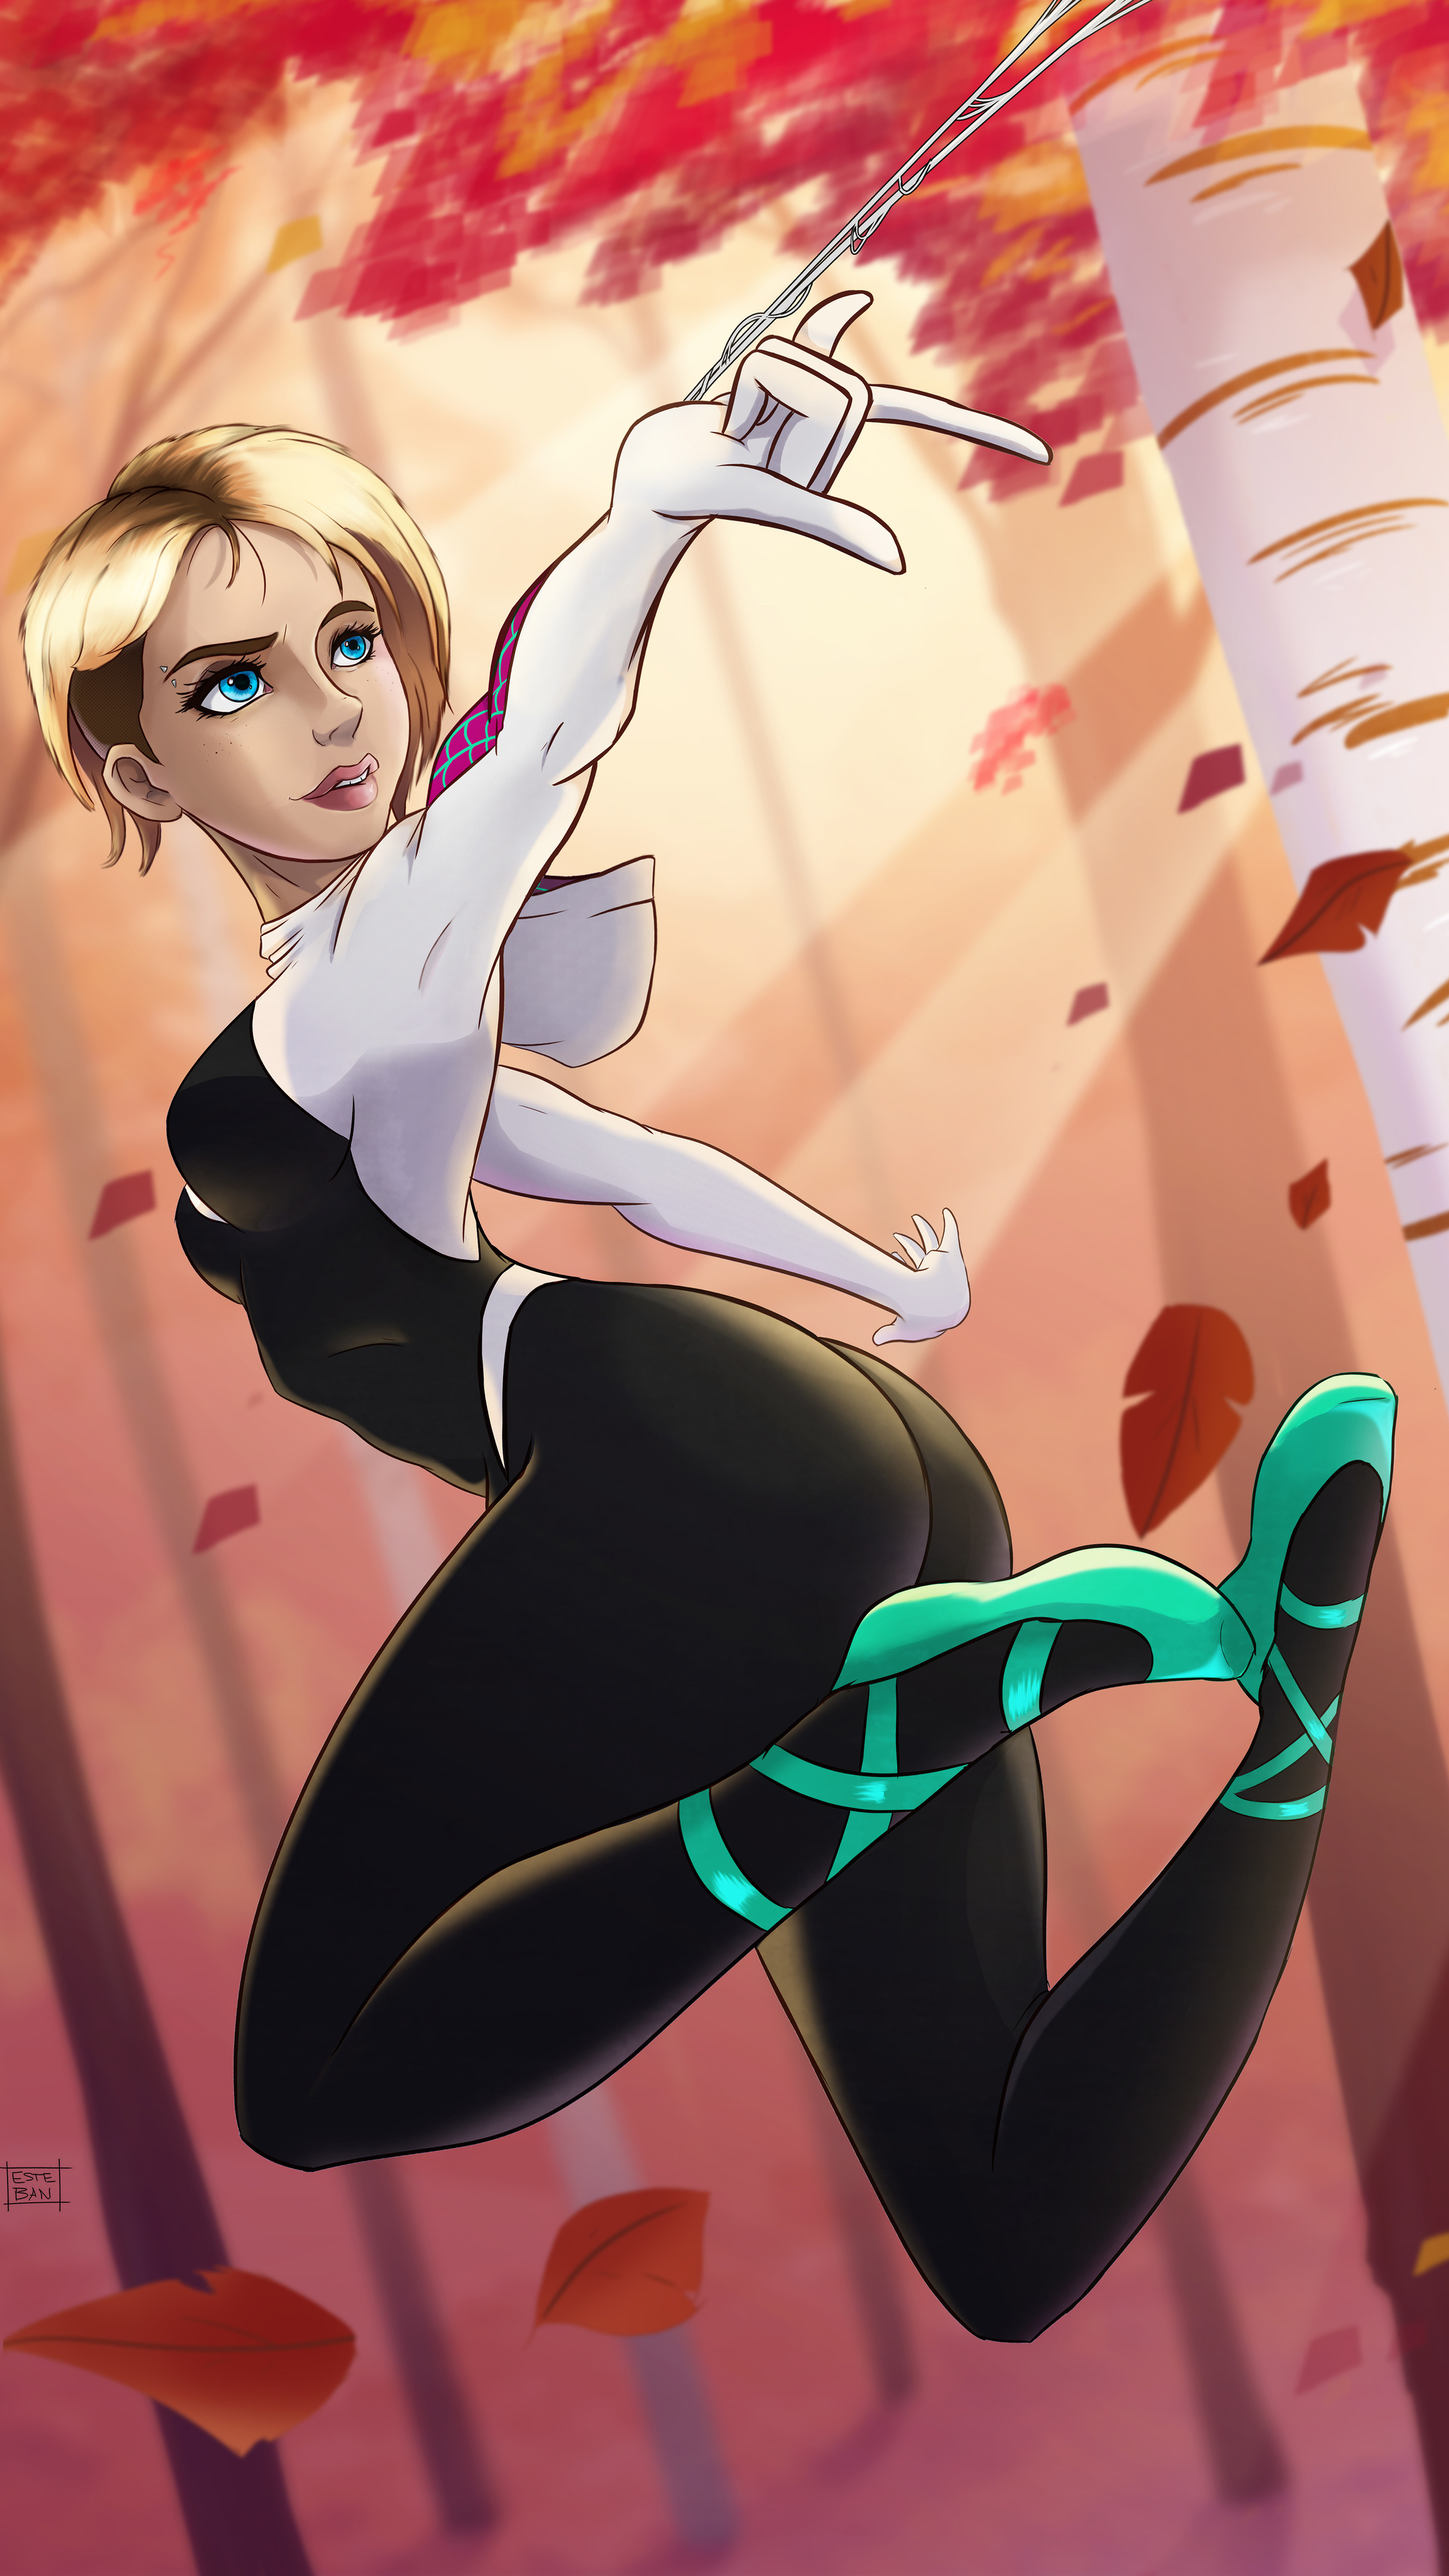 Spider Girl Gwen Stacy, Sony Xperia wallpapers, Heroic poses, Striking visuals, 2160x3840 4K Handy